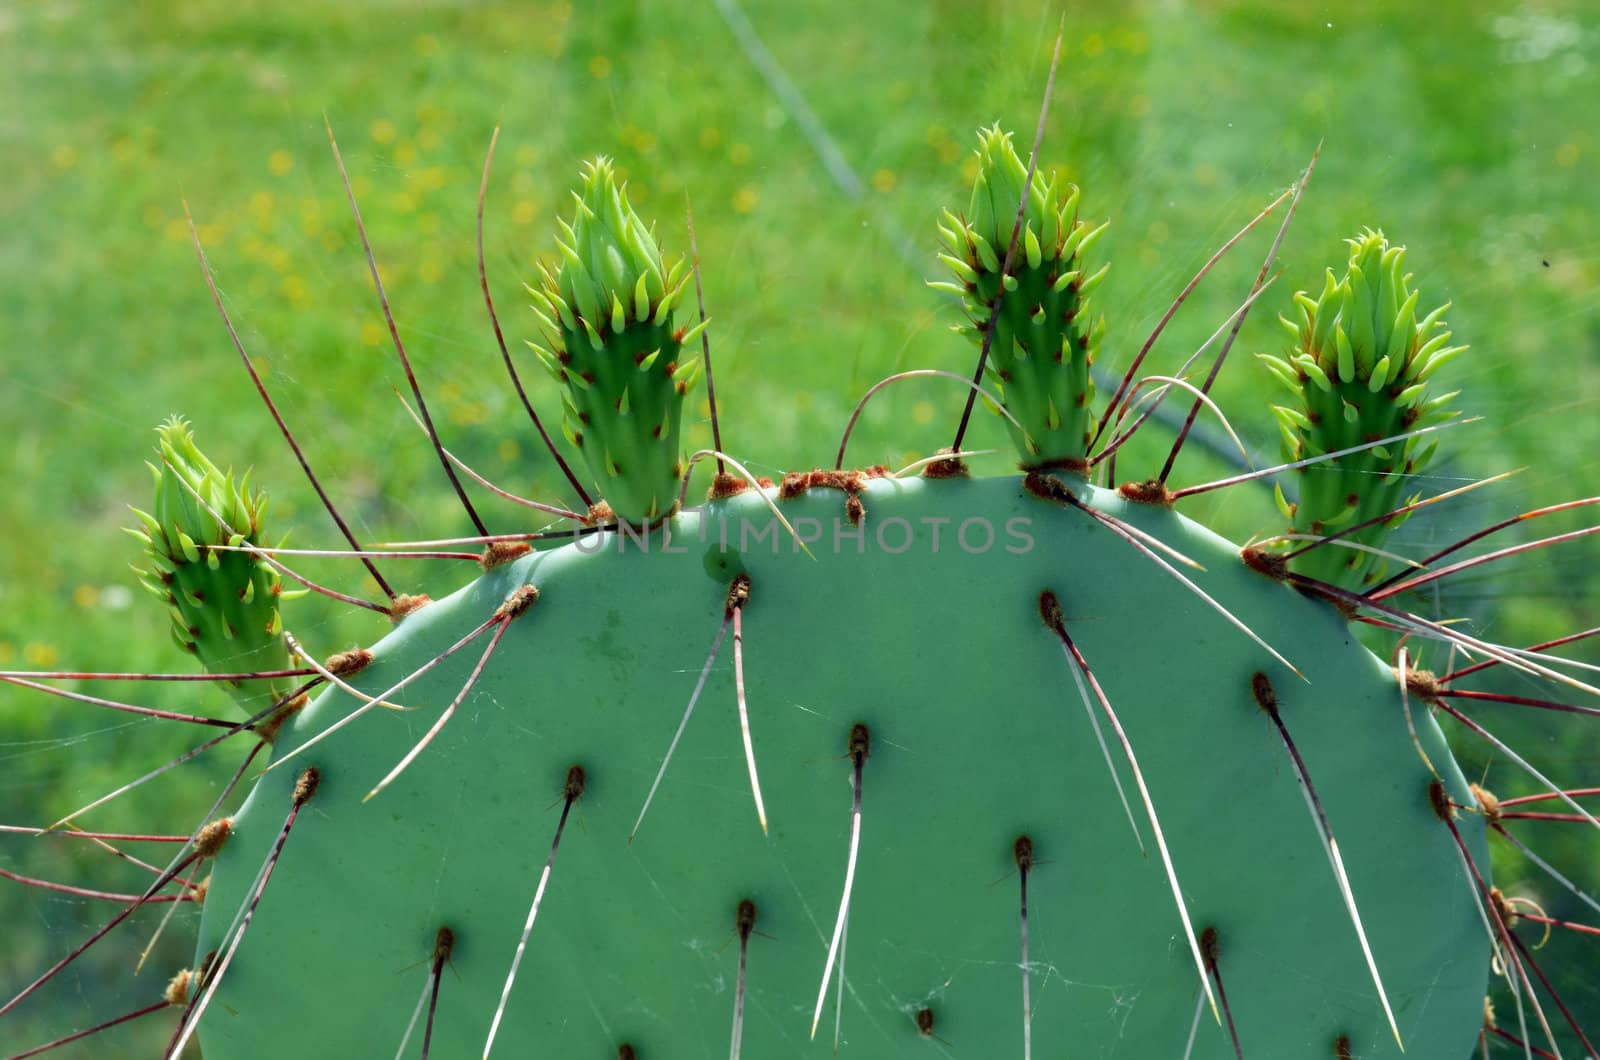 Prickly Pear or Paddle cactus prepared for blooming inside summerhouse. Plant long and sharp spines closeup.